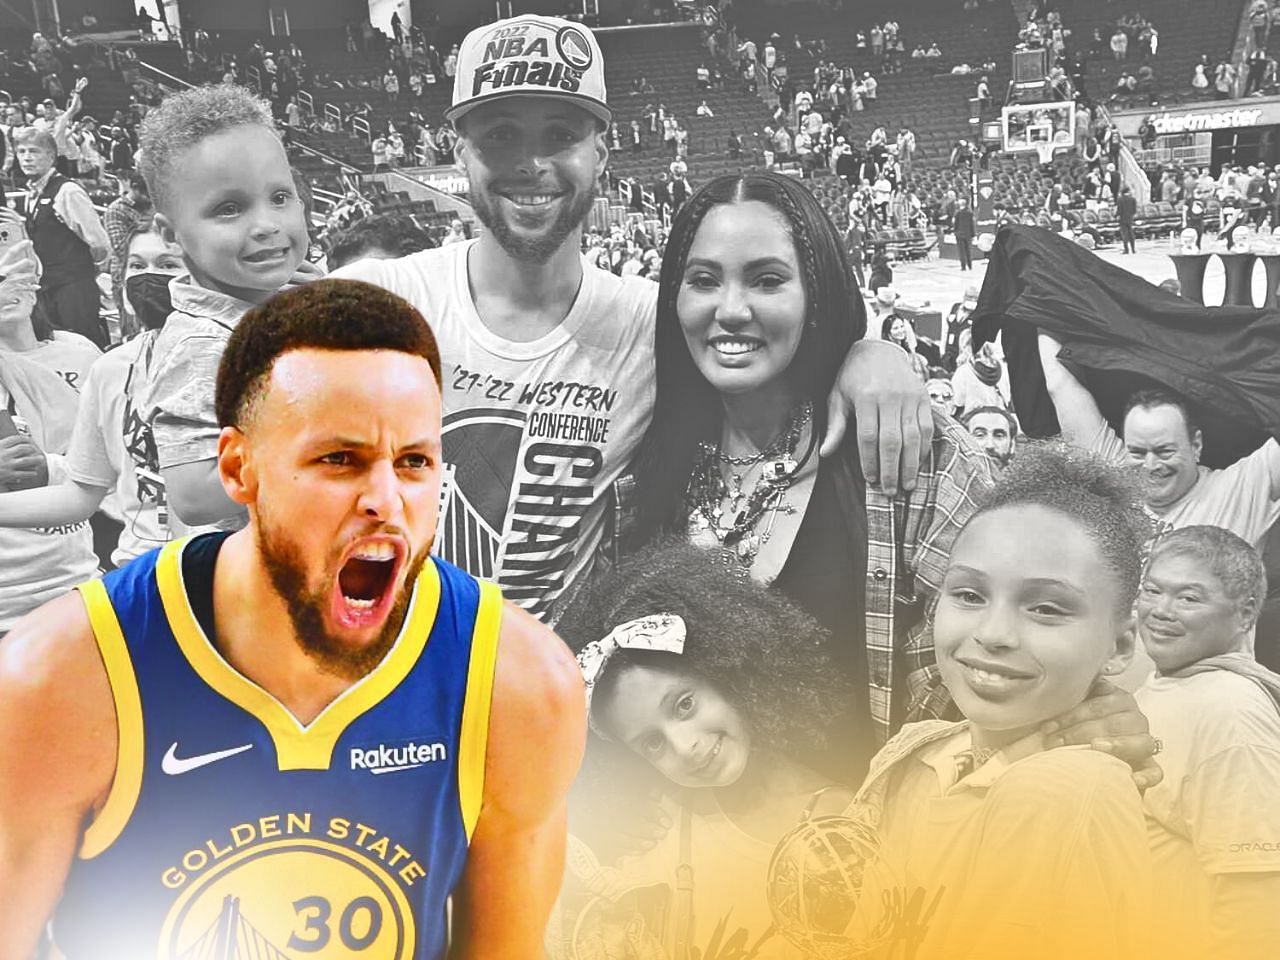 Stephen Curry exclusive: NBA superstar on the 'underrated' mindset that  still drives him despite four NBA championships, NBA News